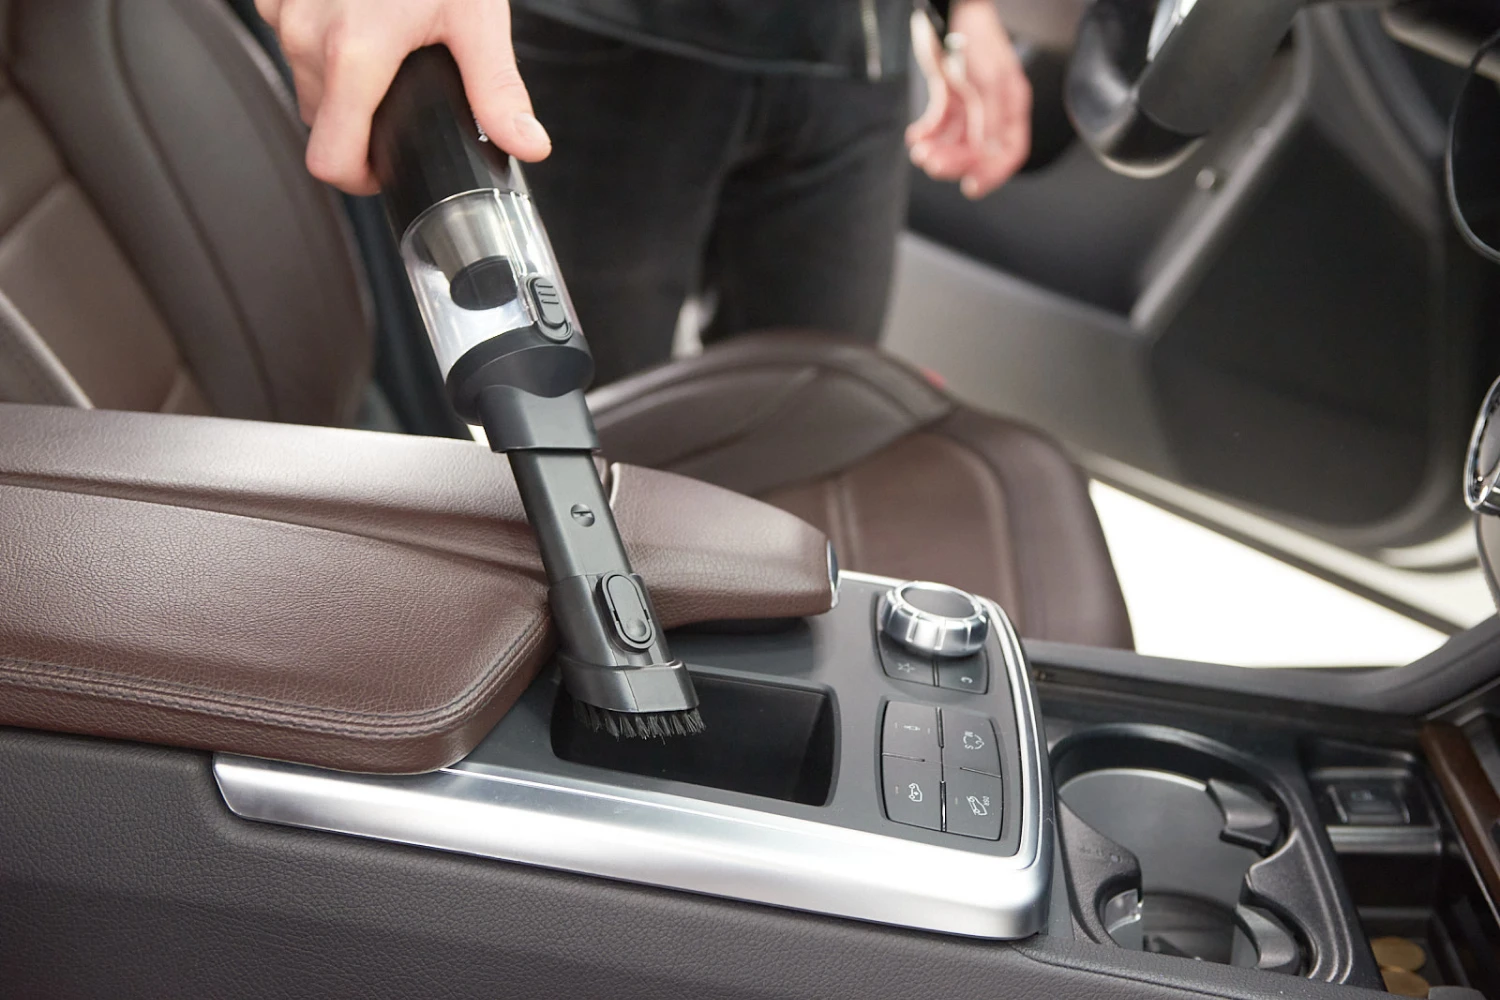 wireless handheld car vacuum cleaner for Toyota Tacoma